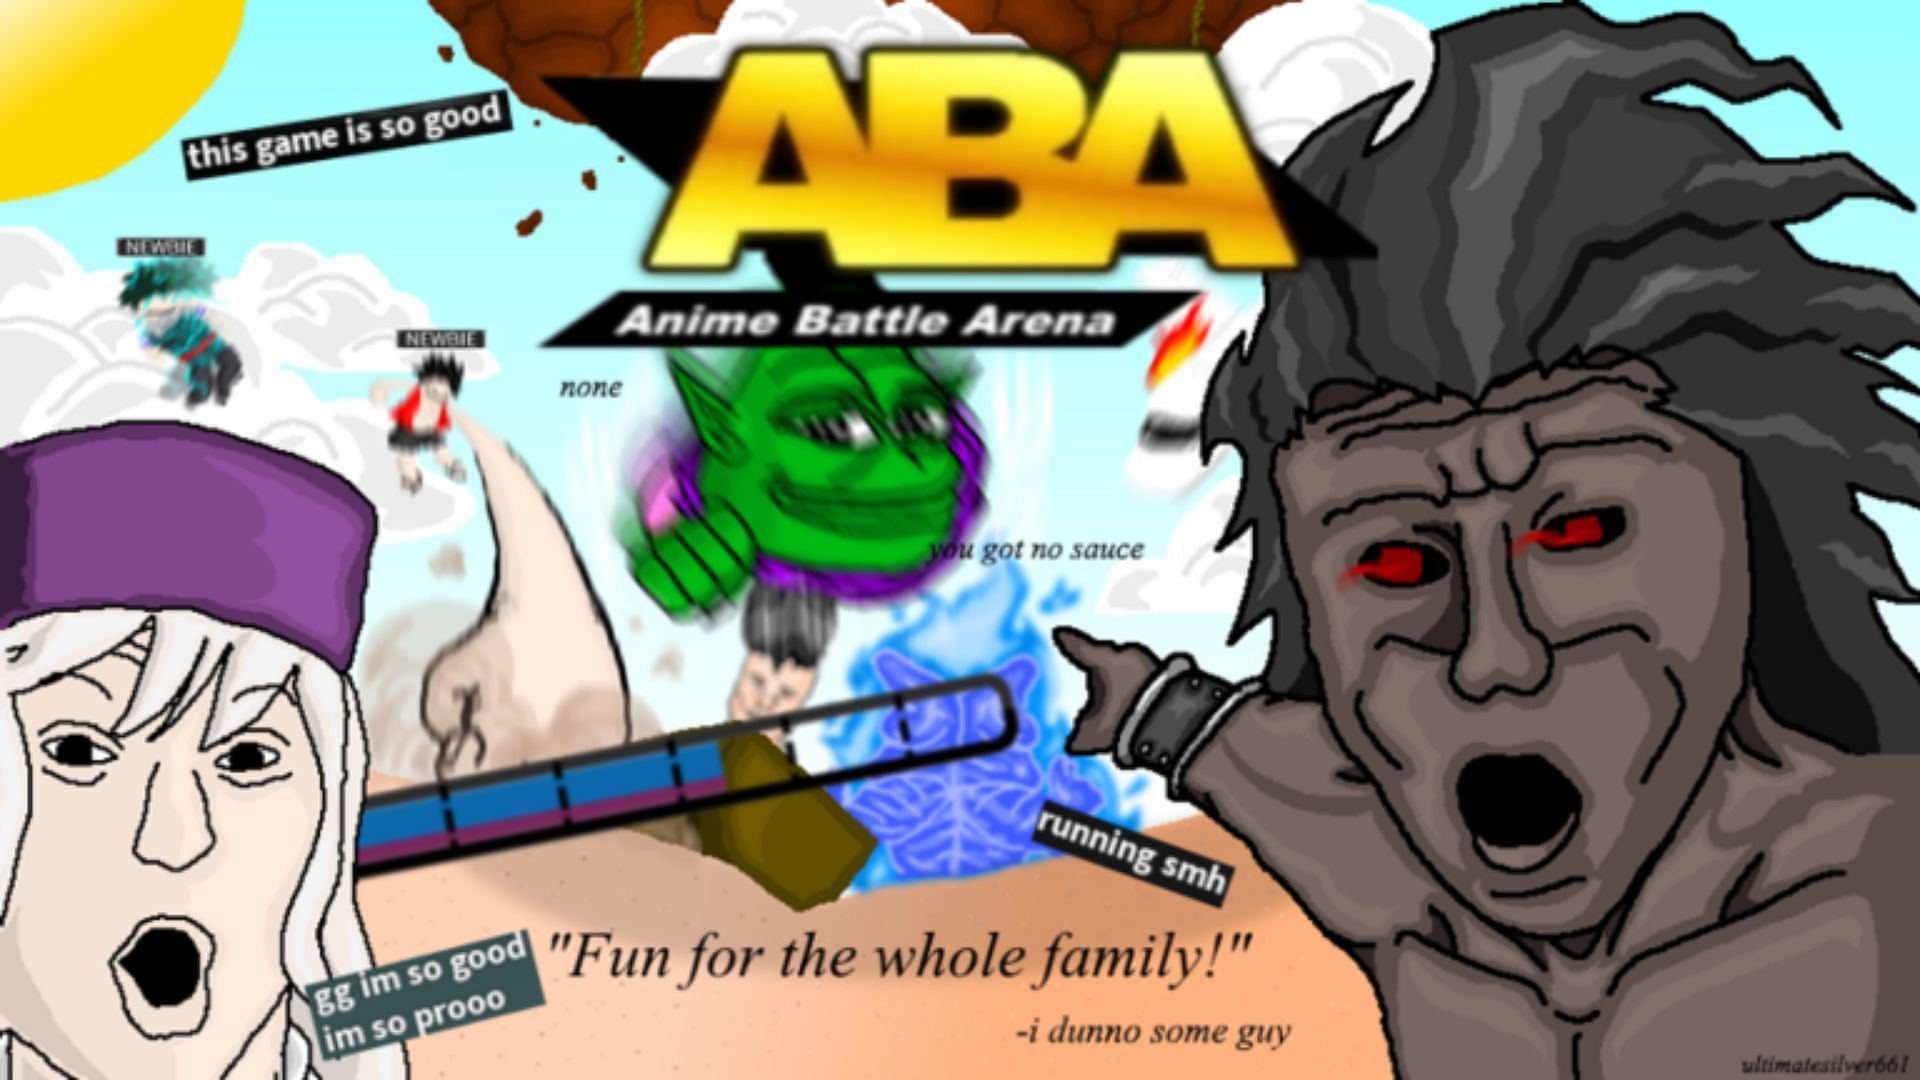 About Anime Battle Arena (Image via Roblox)